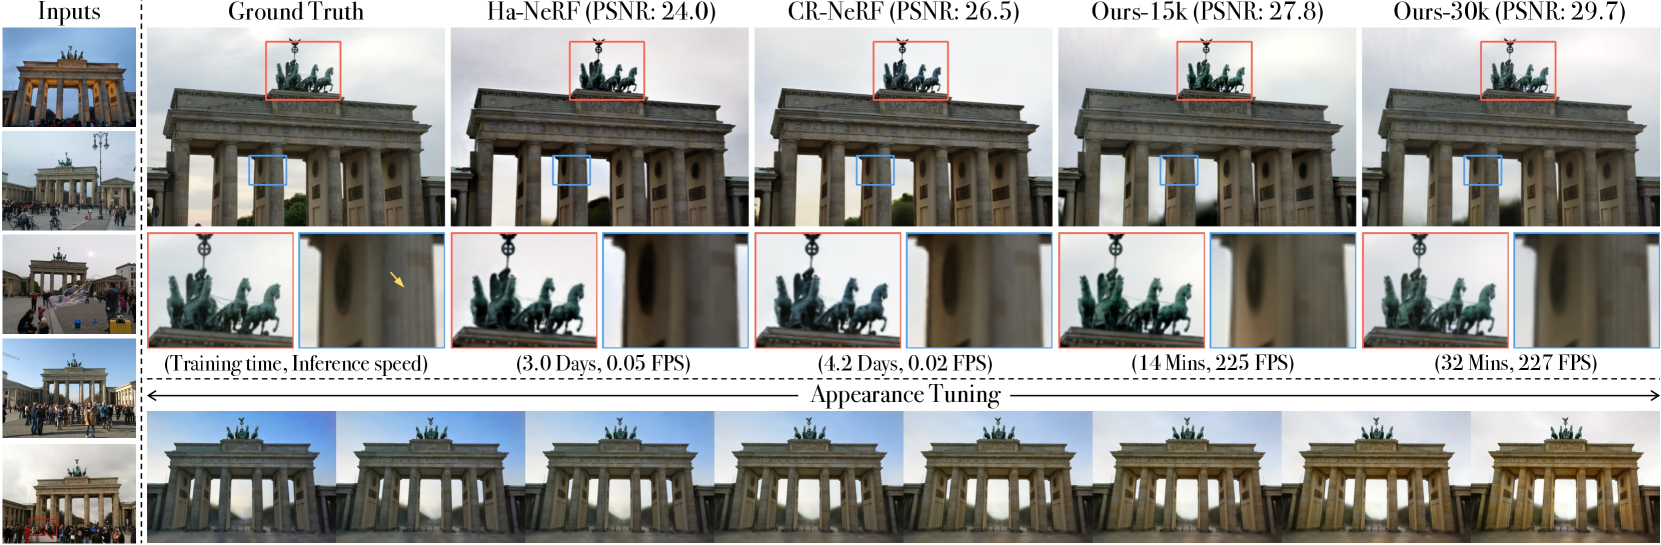 Wild-GS: Real-Time Novel View Synthesis from Unconstrained Photo Collections